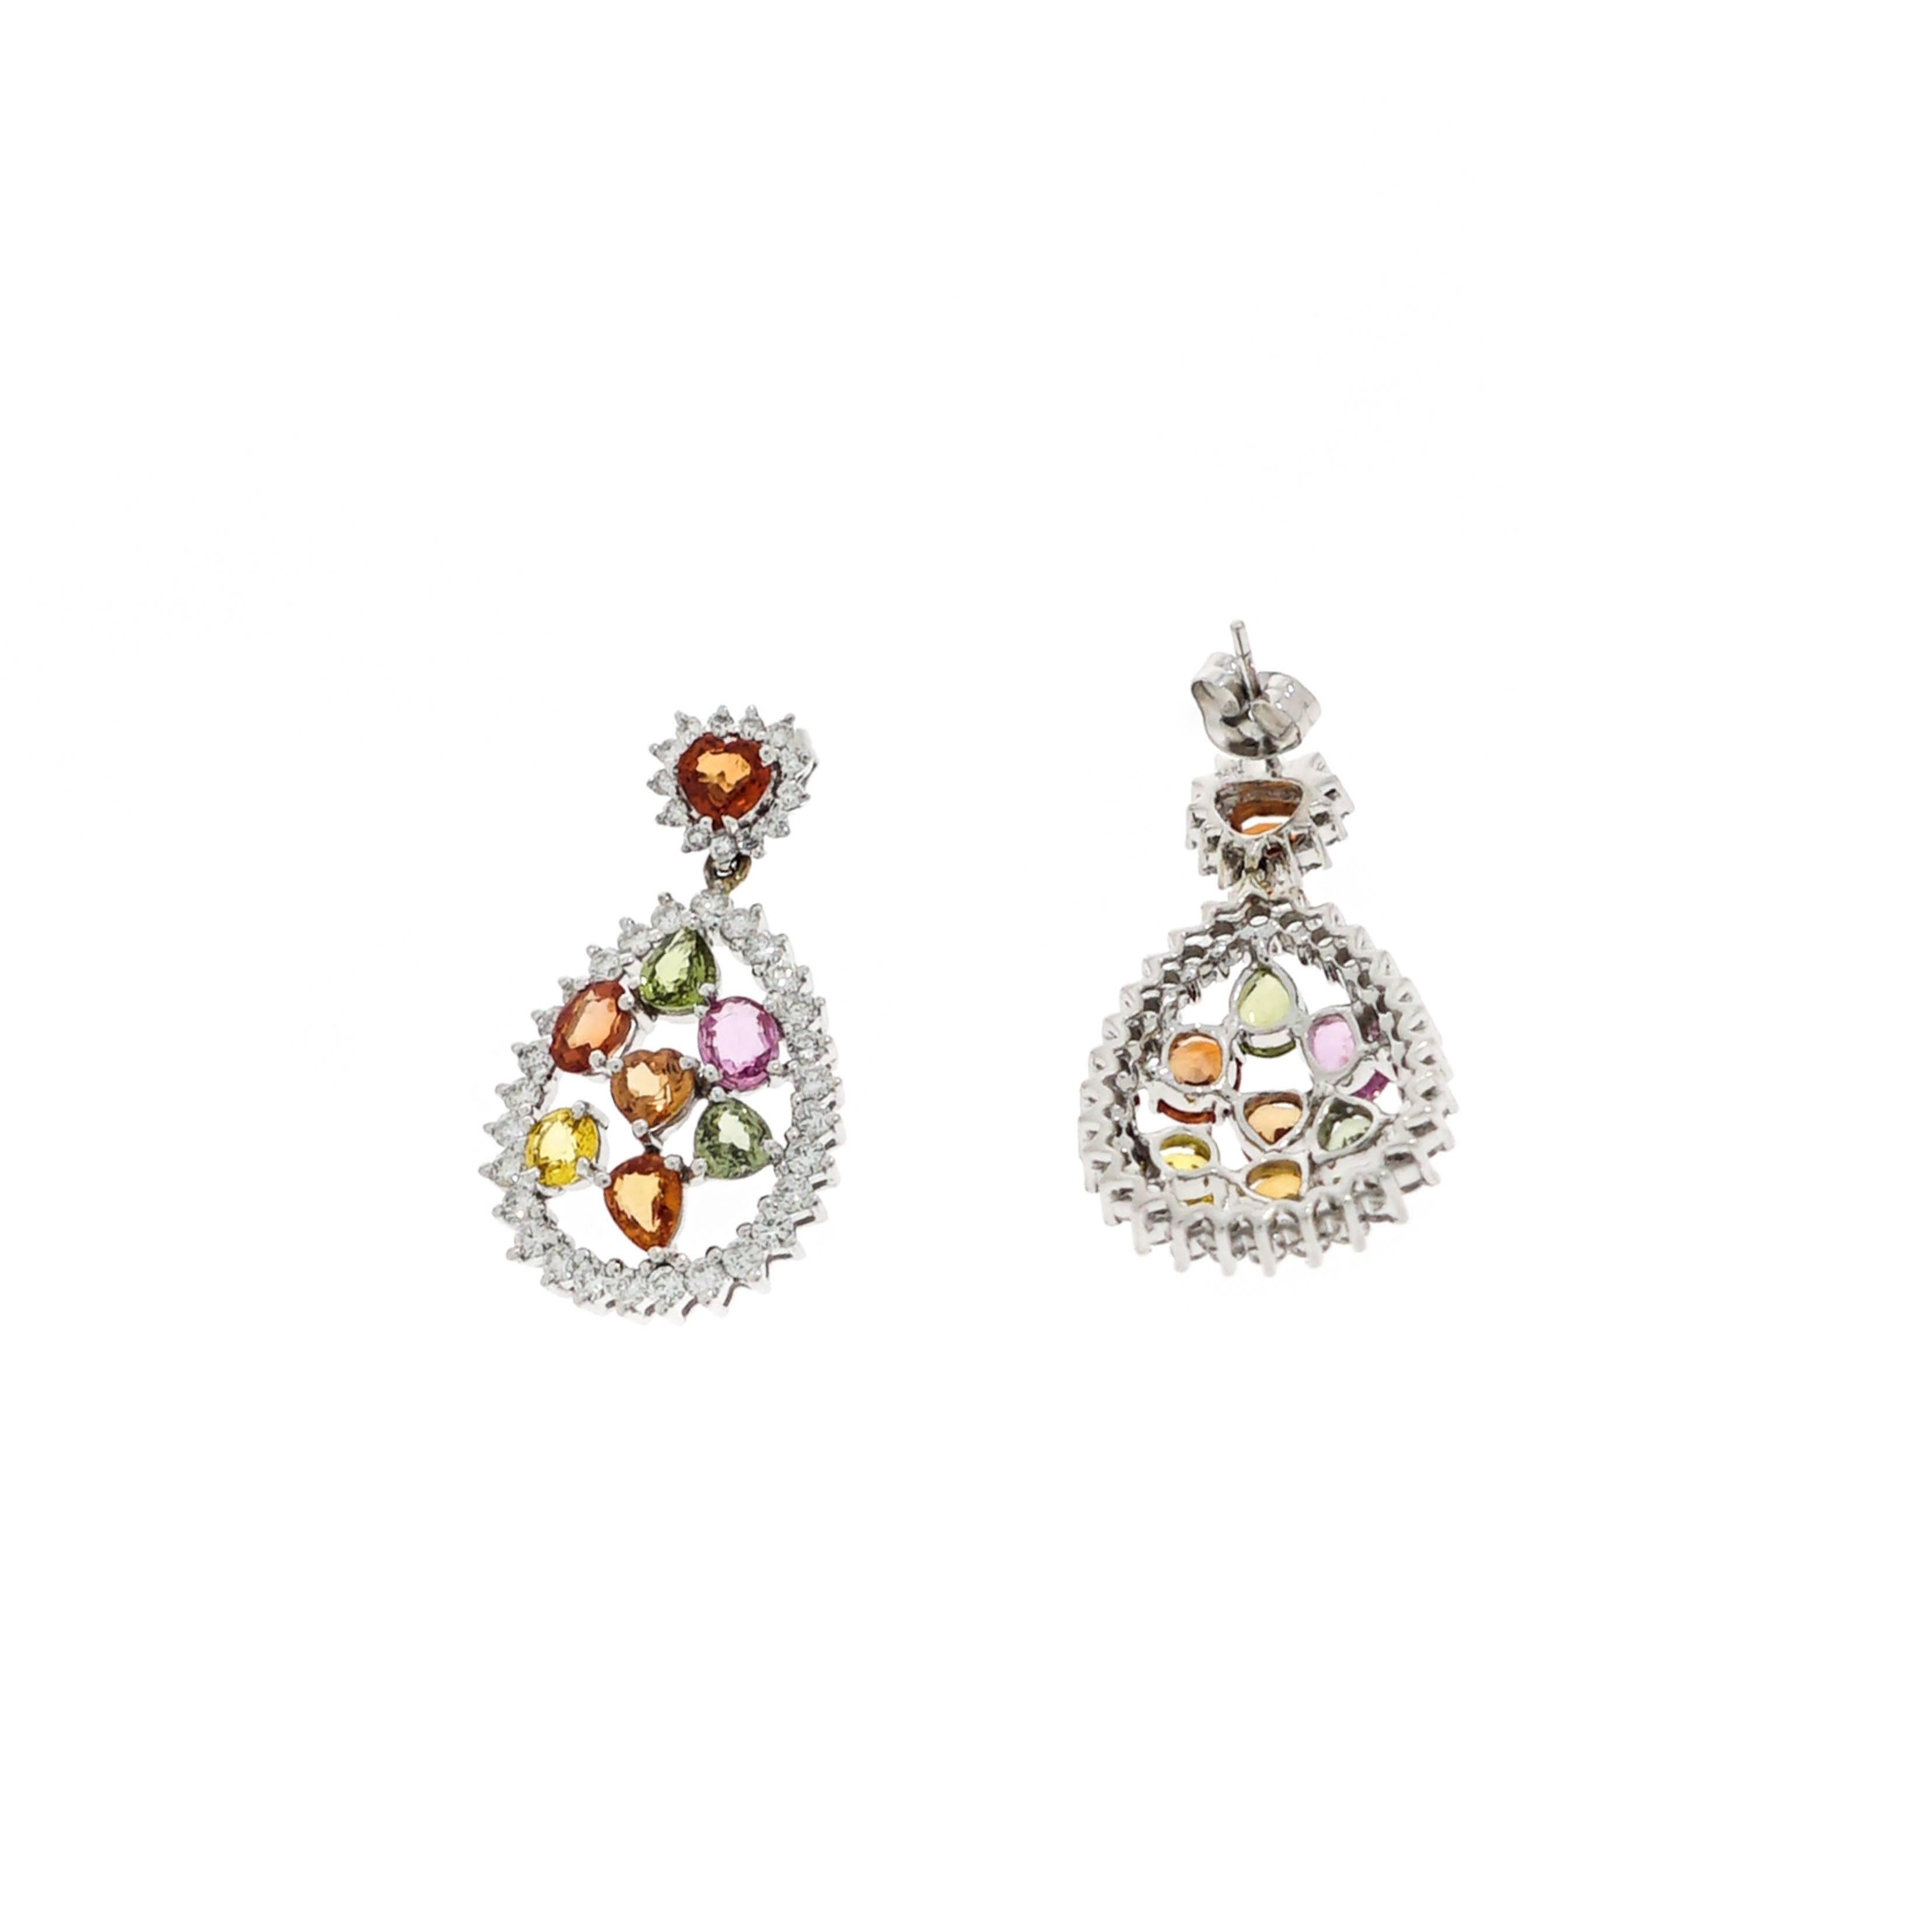 We love what we do and we pride ourselves on creating beautiful piece of jewelry. 
Handcrafted with extraordinary care by our master jewelers in our own workshop, 
This precious multi-colored stone earrings comprised of mandarin garnet, green